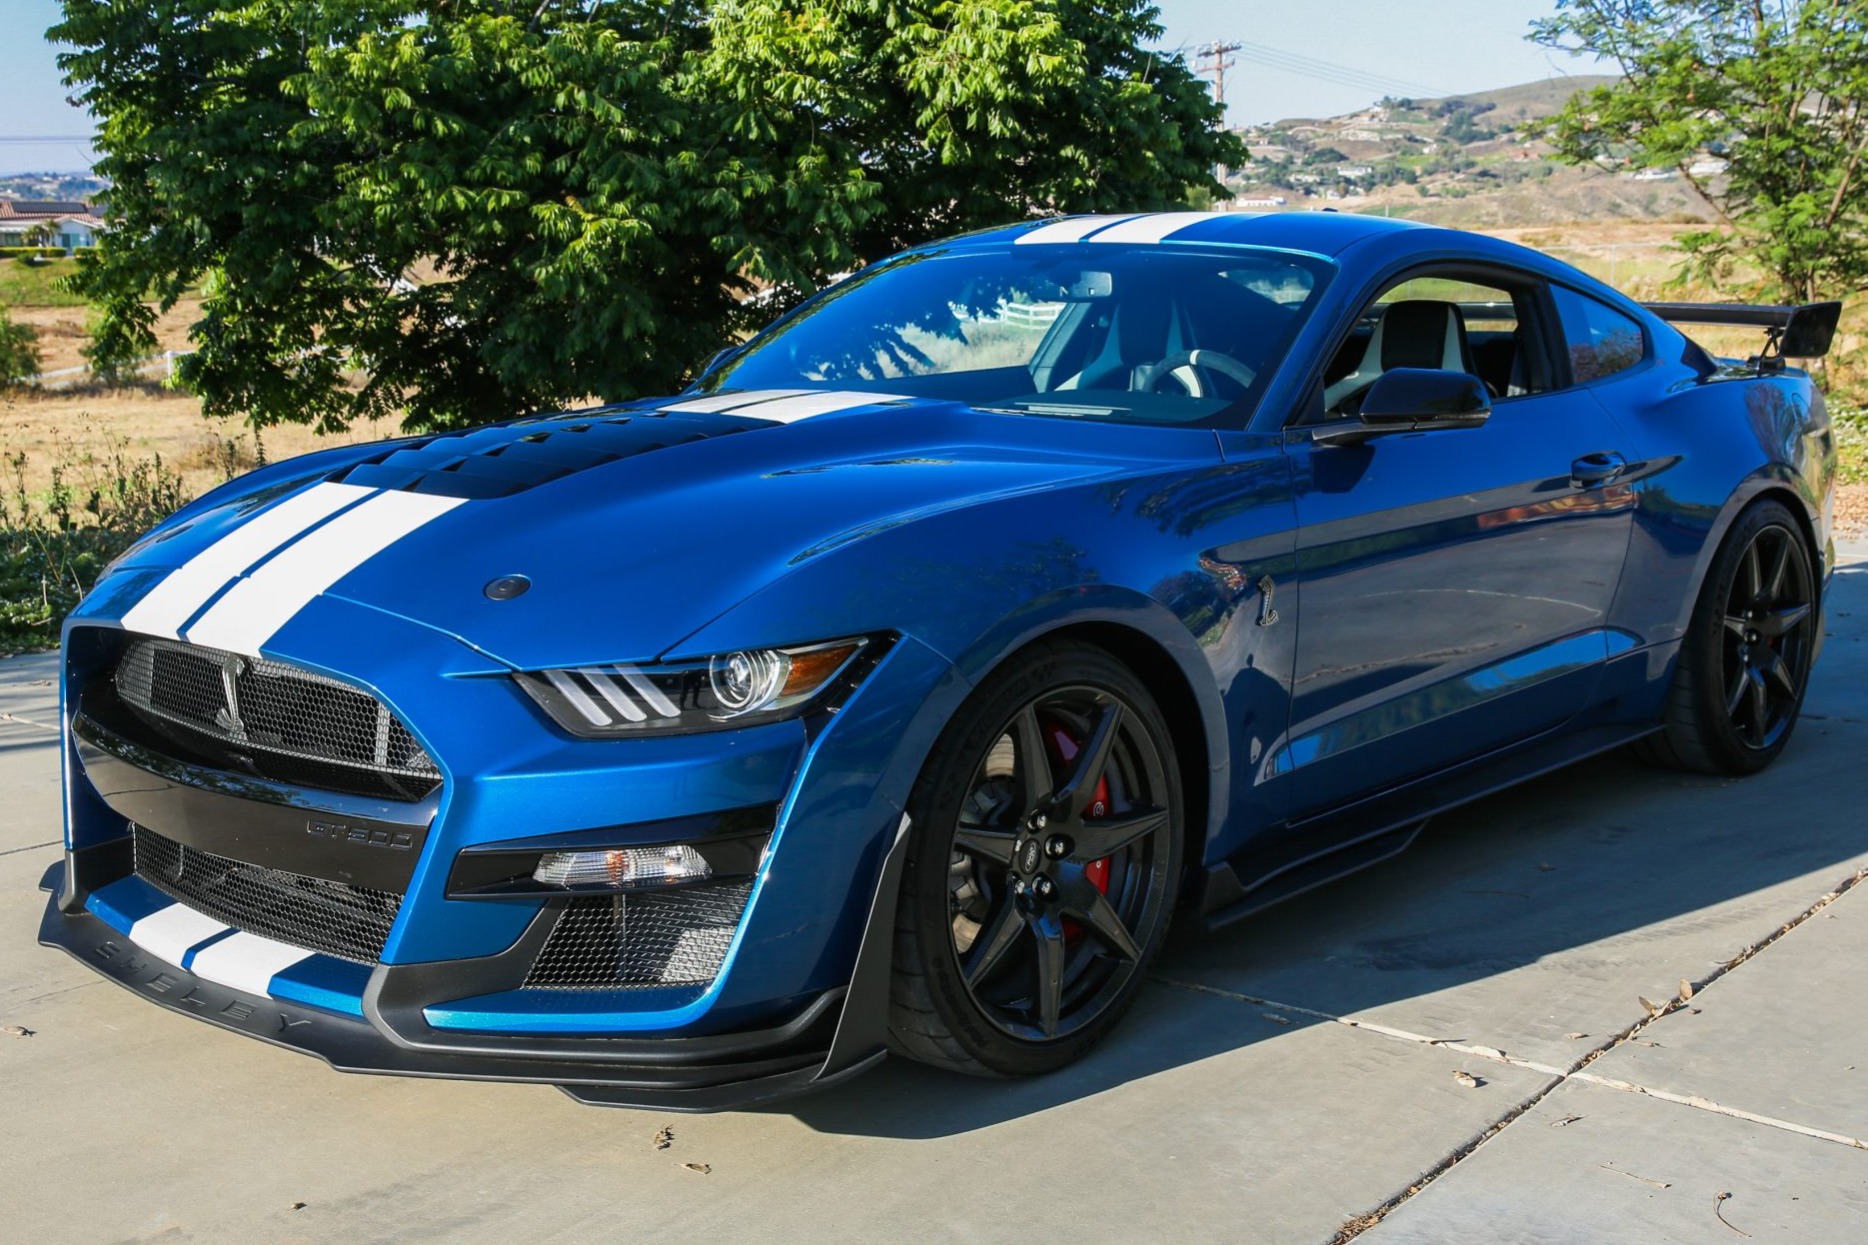 Used 1,100-Mile 2021 Ford Mustang Shelby GT500 Carbon Fiber Track Pack Review